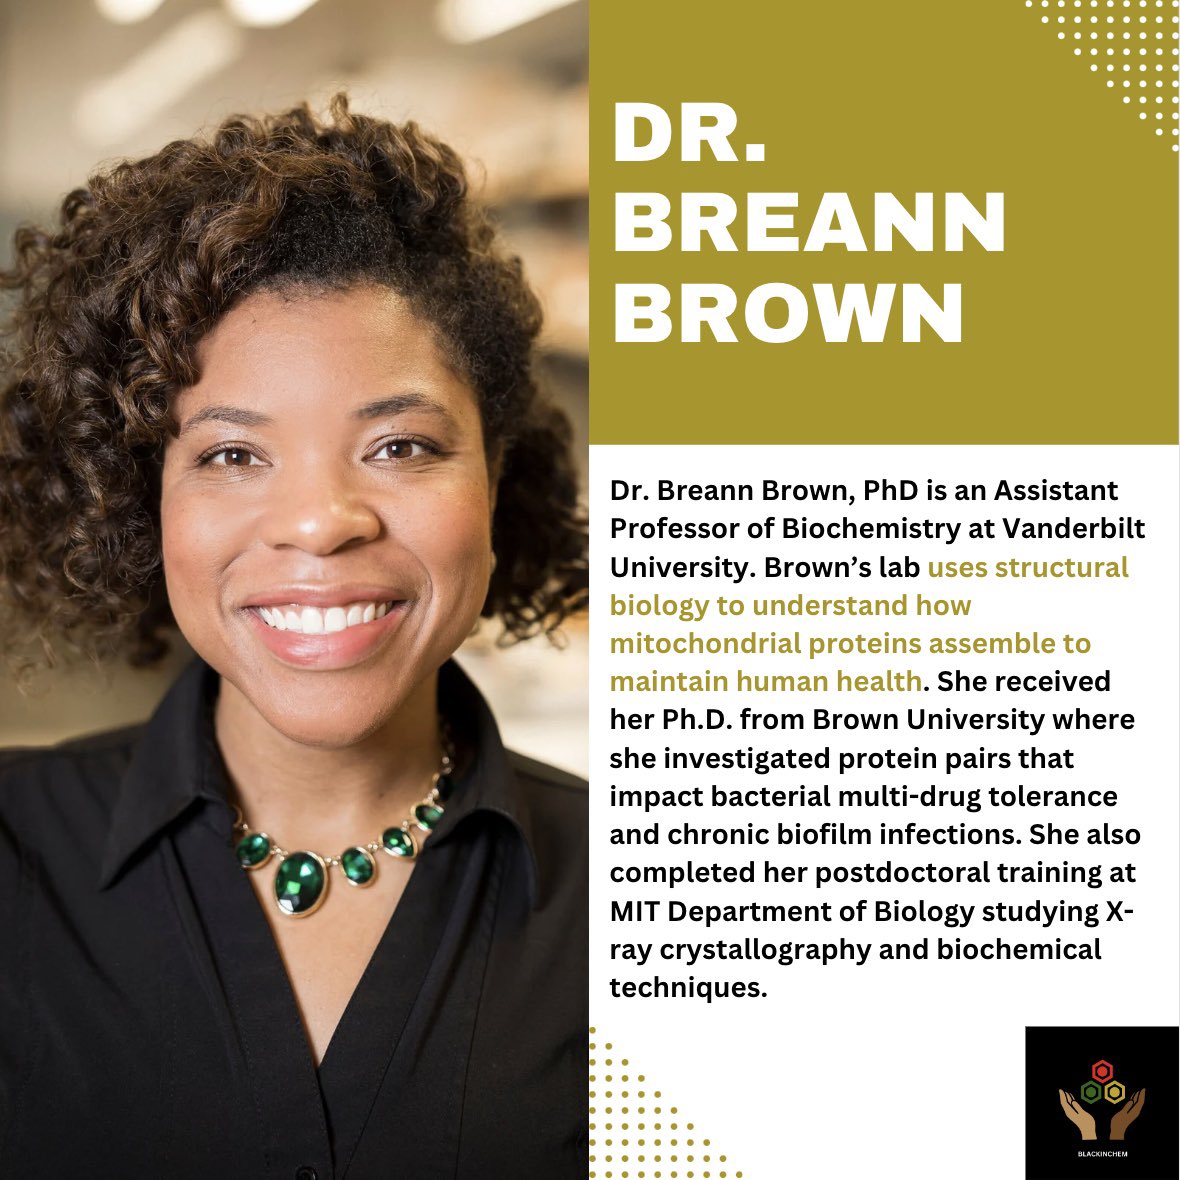 Dr. Breann Brown, is an Assistant Professor of Biochem at @VanderbiltU . Their lab uses structural biology to understand how mitochondrial proteins assemble to maintain human health. She got her Ph.D. from @BrownUniversity and did a Postdoc at MIT Learn more about Dr. Brown👇🏾